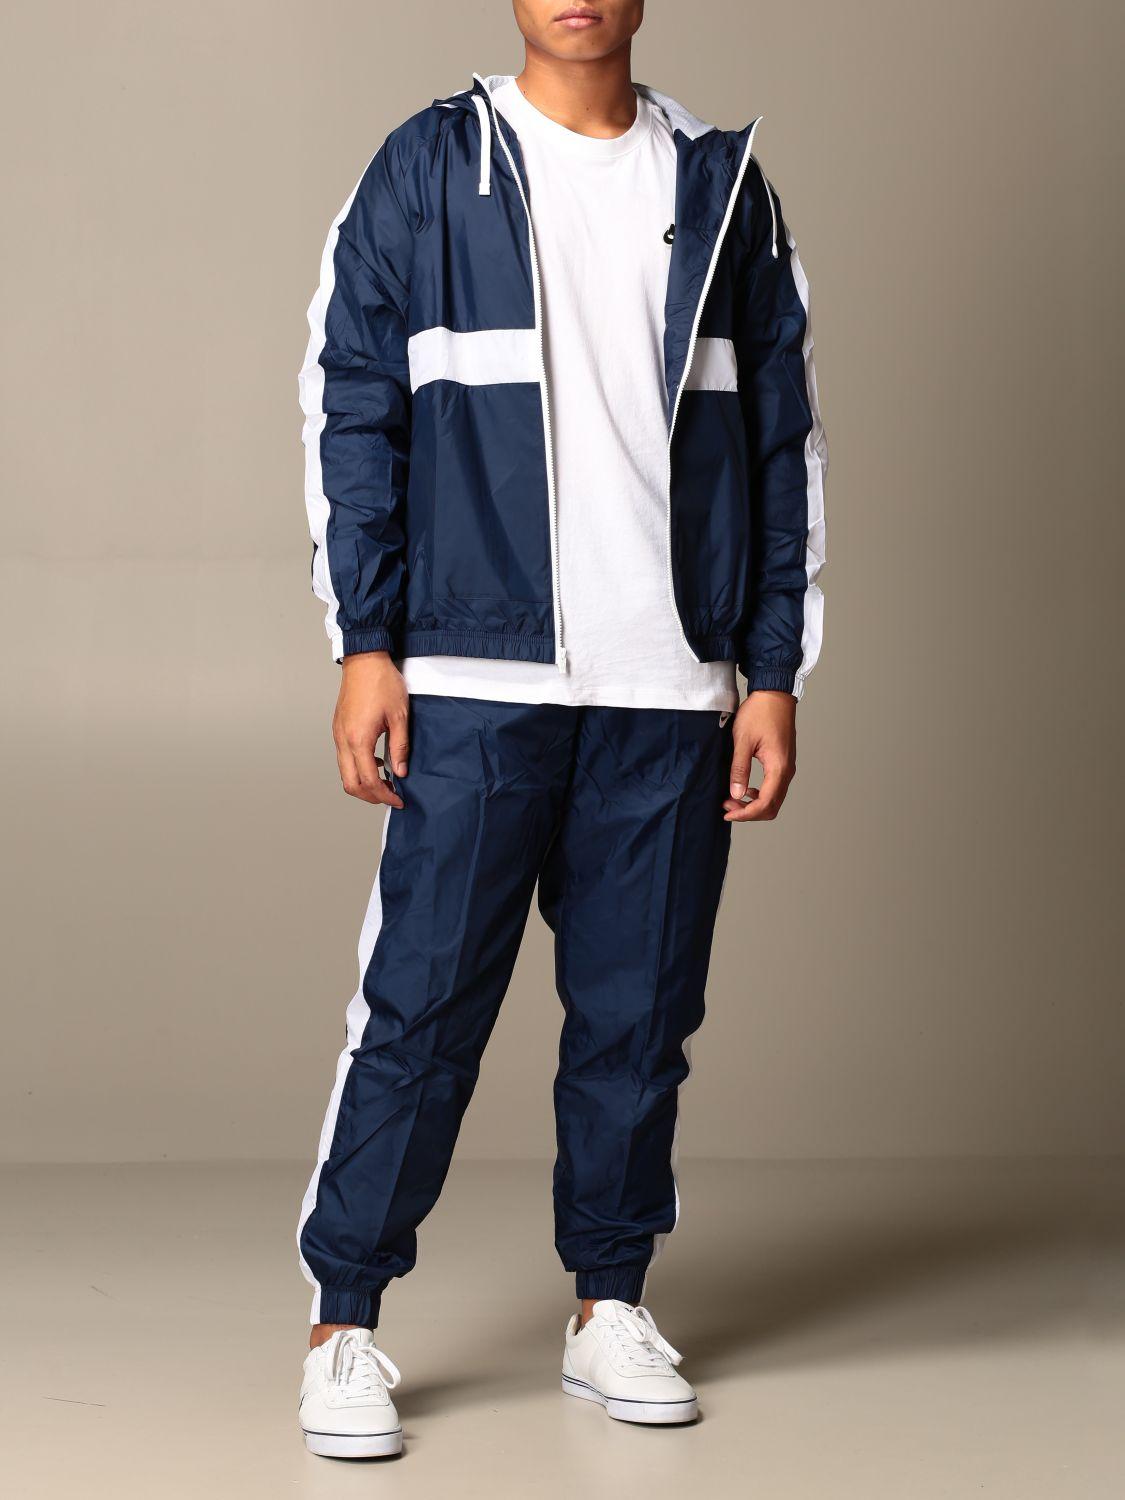 nike hoxton woven tracksuitSpecial Discount - OFF 57% -kjscefees.com